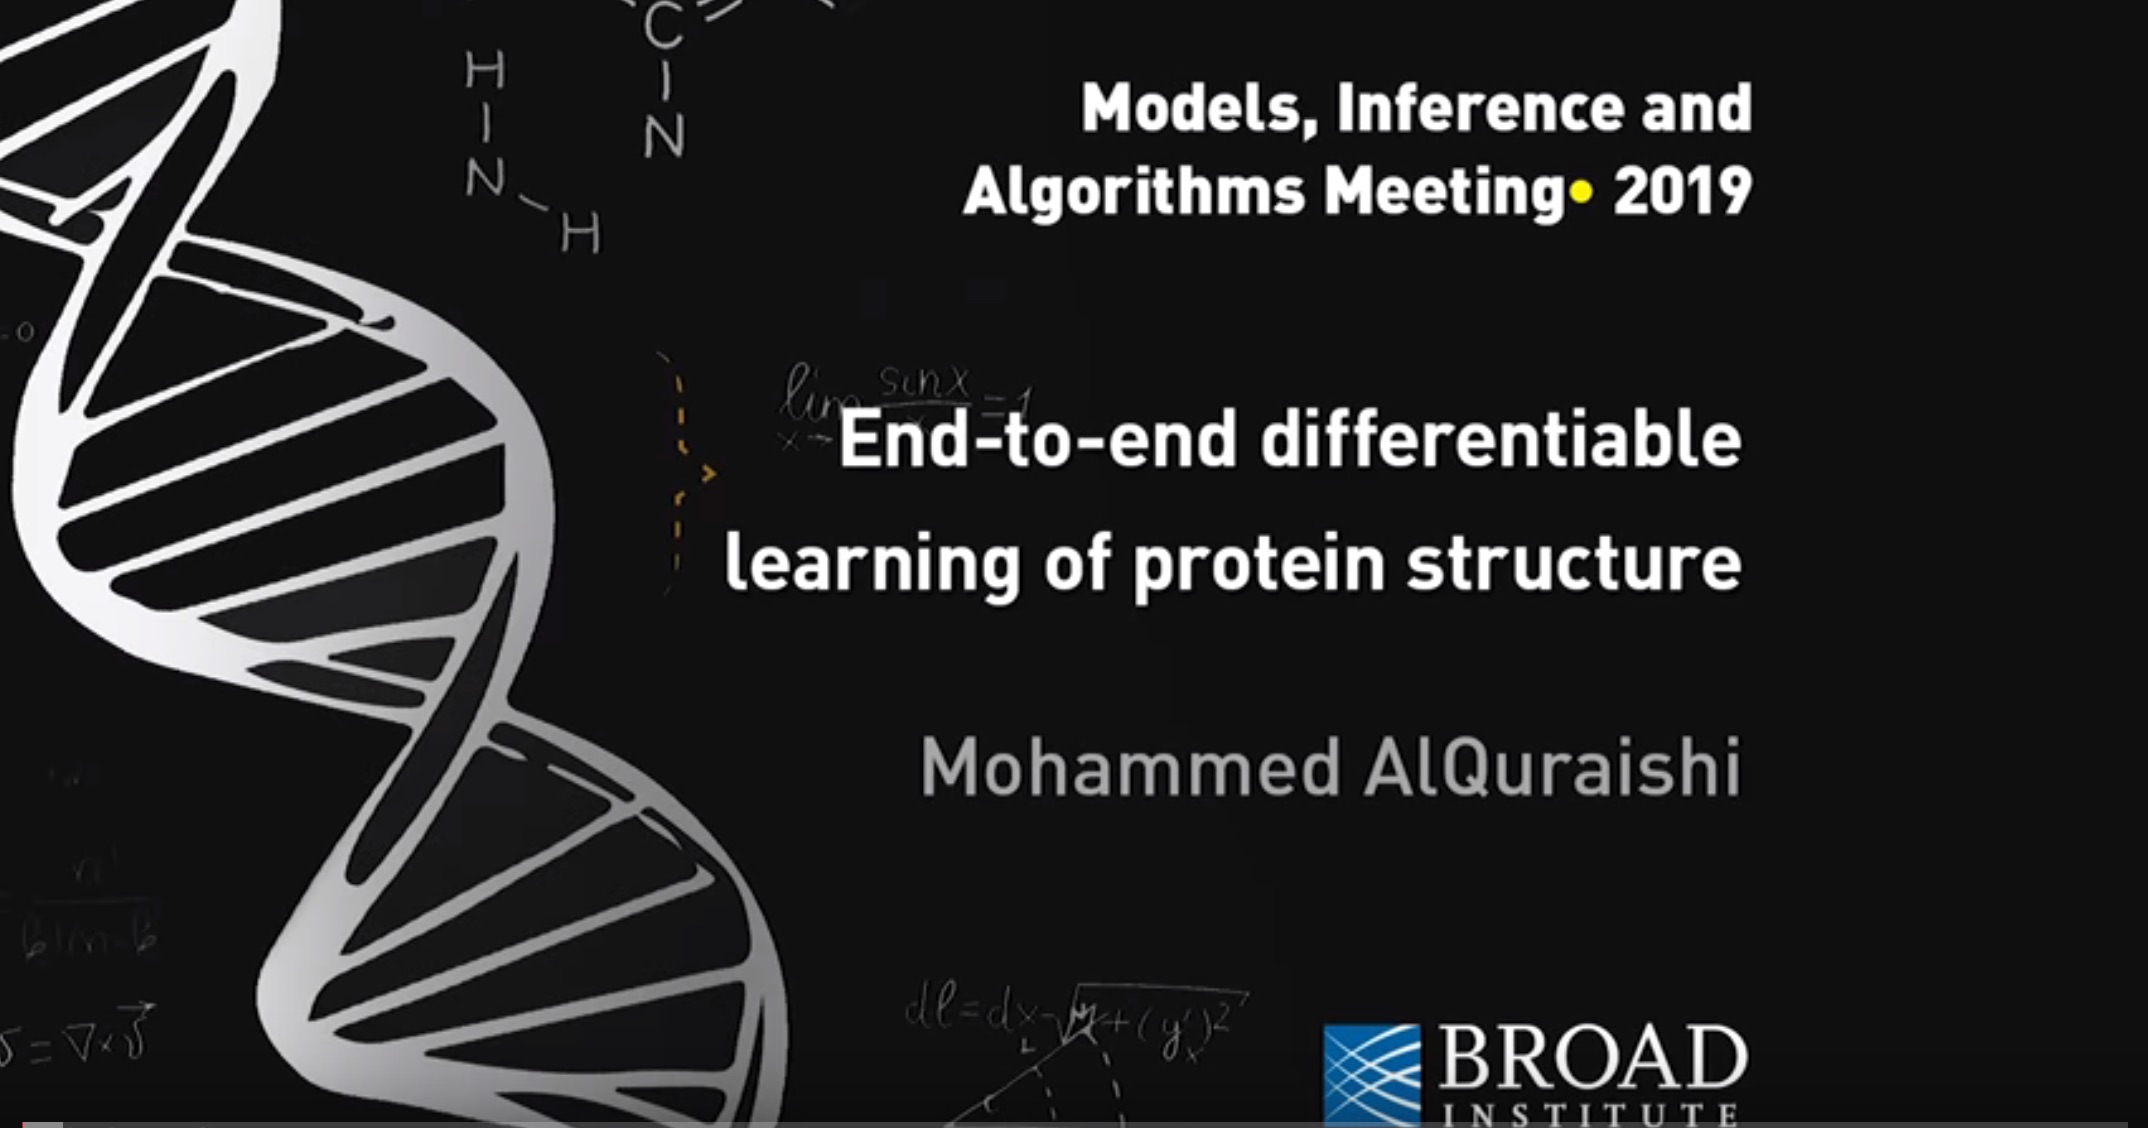 Predicting protein structure from sequence is a central challenge of biochemistry. Co-evolution methods show promise, but an explicit sequence-to-structure map remains elusive. Advances in deep learning that replace complex, human-designed pipelines with differentiable models optimized end-to-end suggest the potential benefits of similarly reformulating structure prediction. Here we report the first end-to-end differentiable model of protein structure.